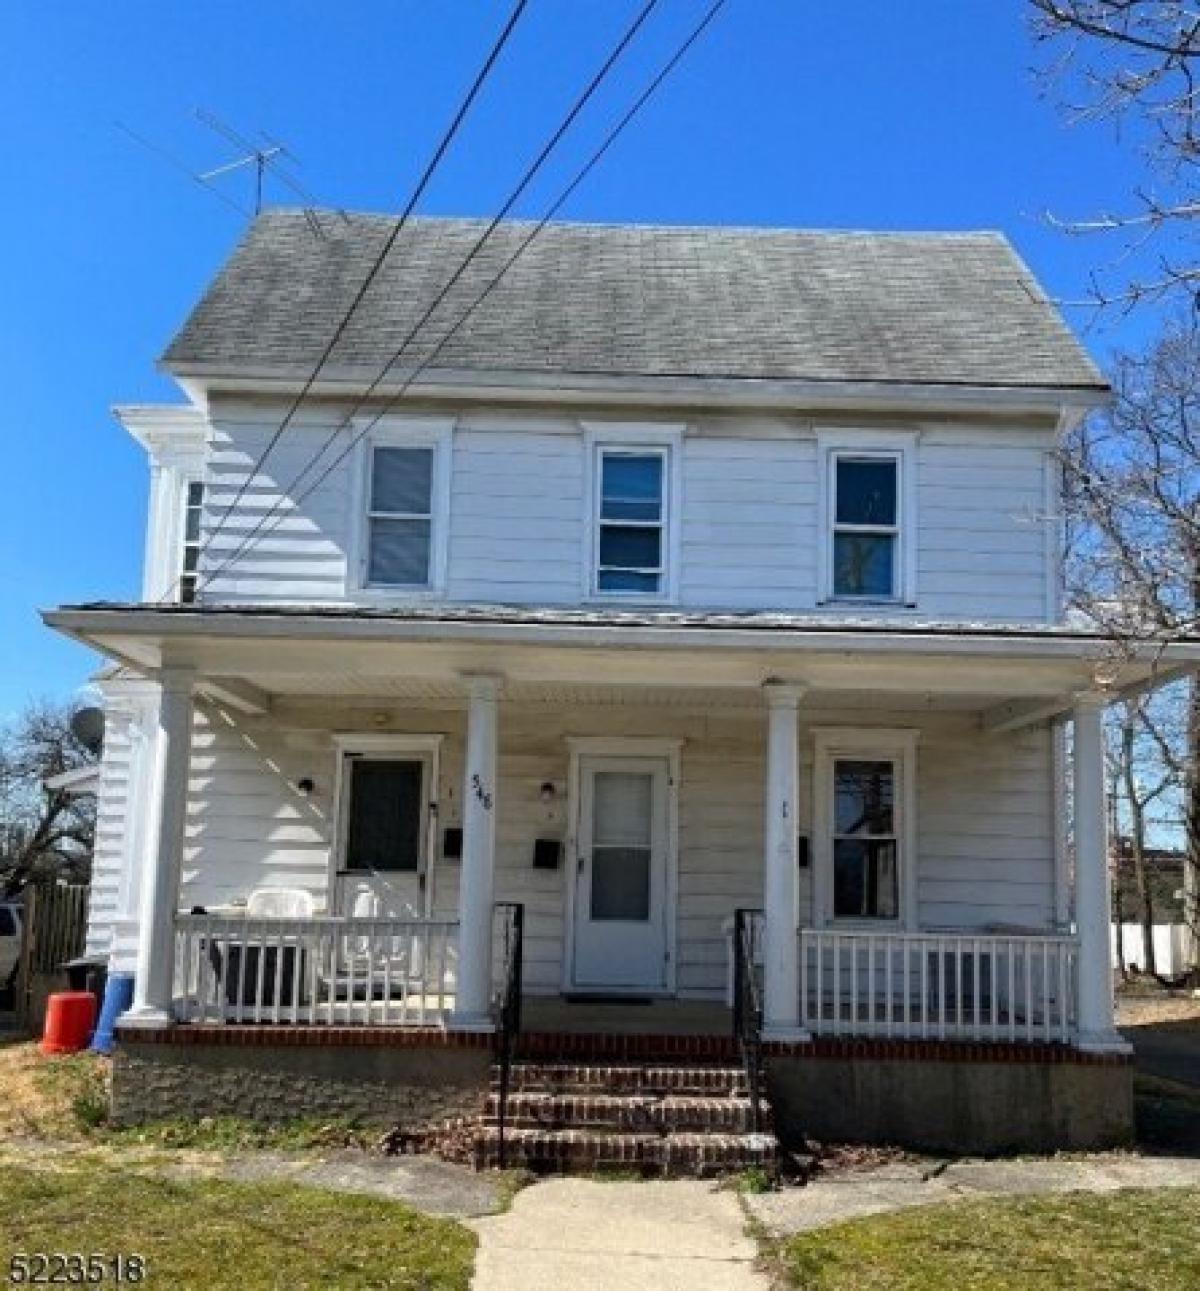 Picture of Home For Sale in Paulsboro, New Jersey, United States